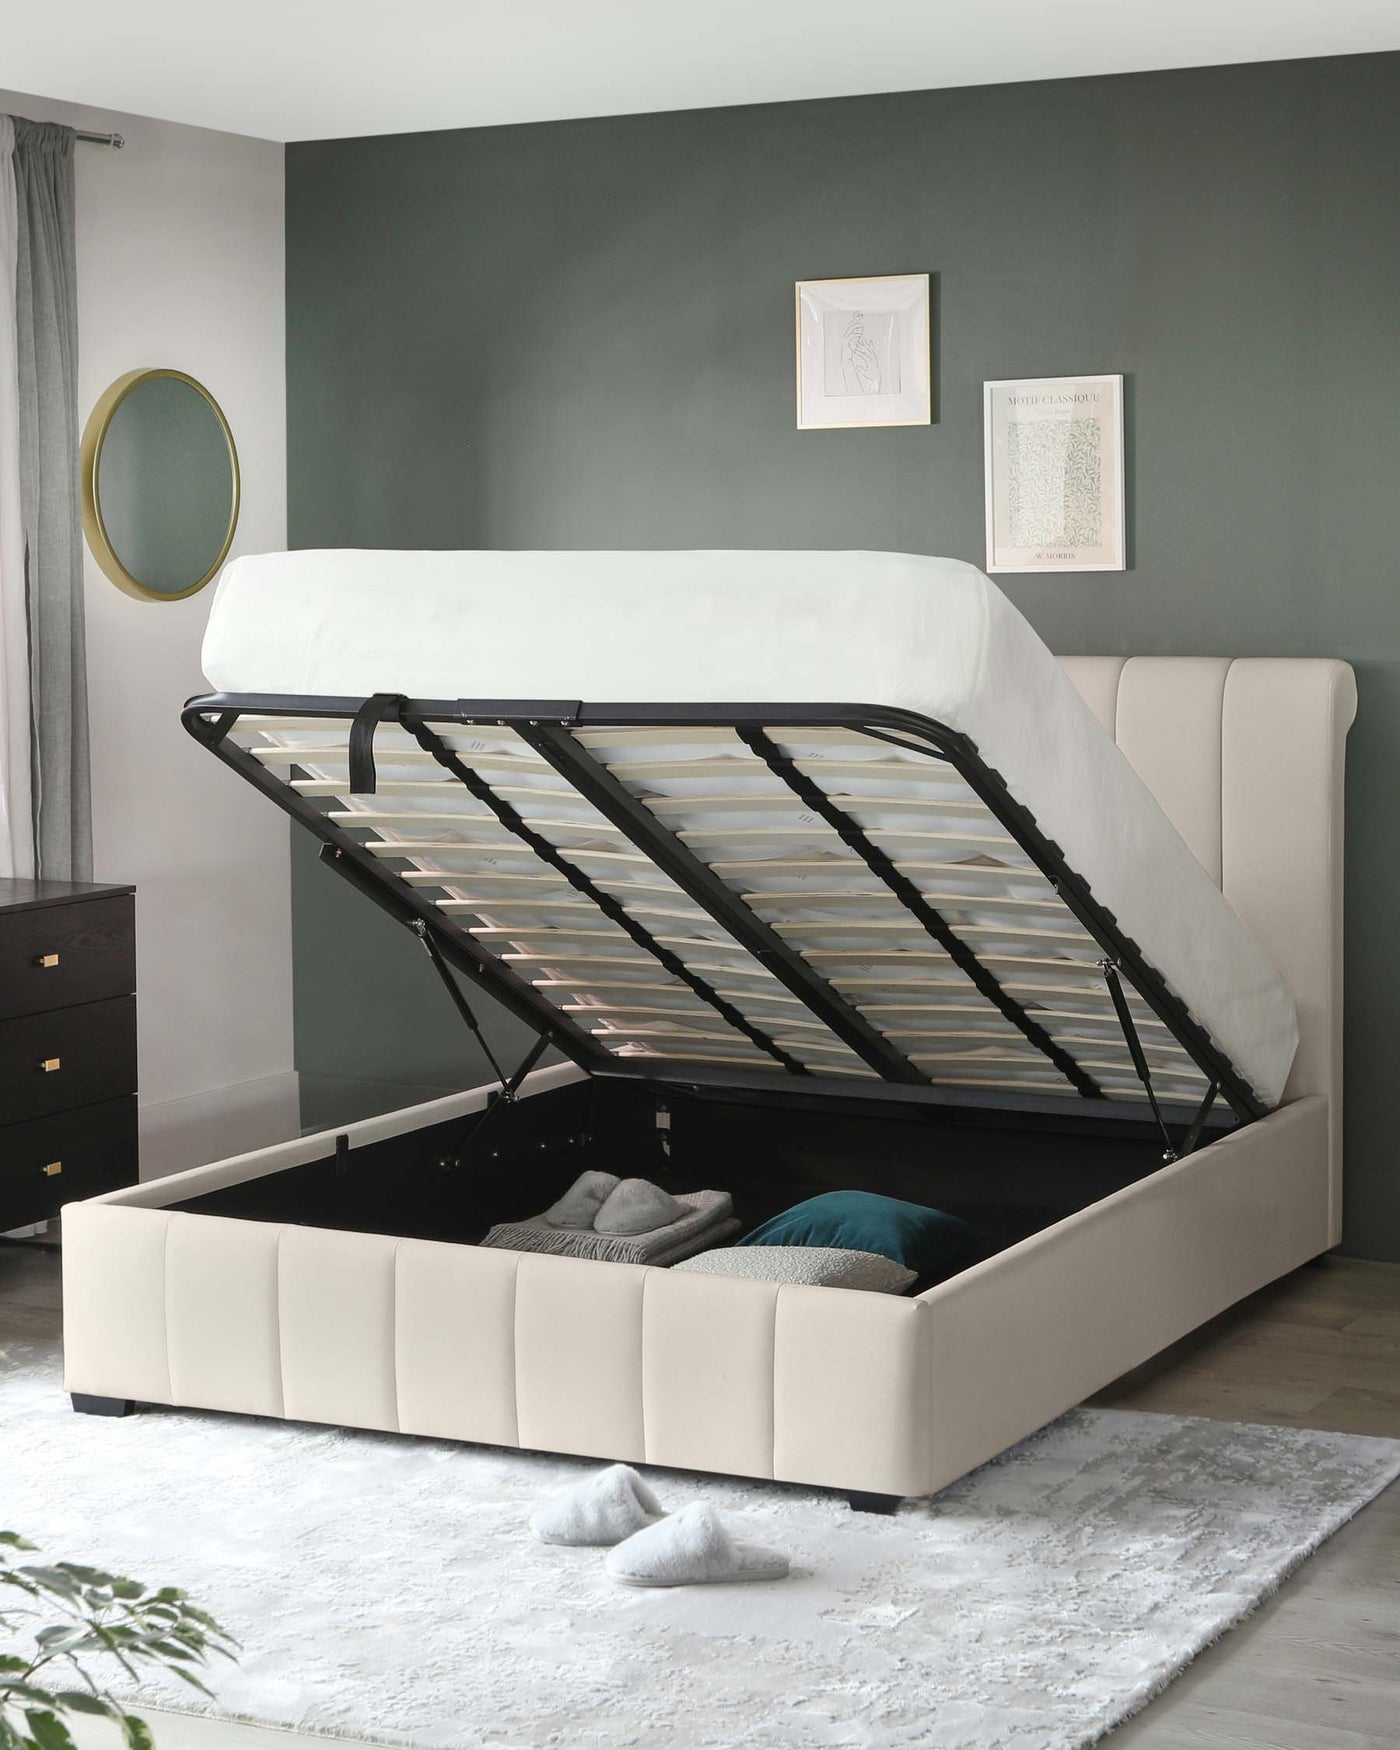 Modern upholstered storage bed with a lift-up frame revealing a spacious storage compartment, featuring a tall padded headboard and a sleek design in a neutral colour palette. A coordinating dark wood bedside drawer cabinet is also visible.